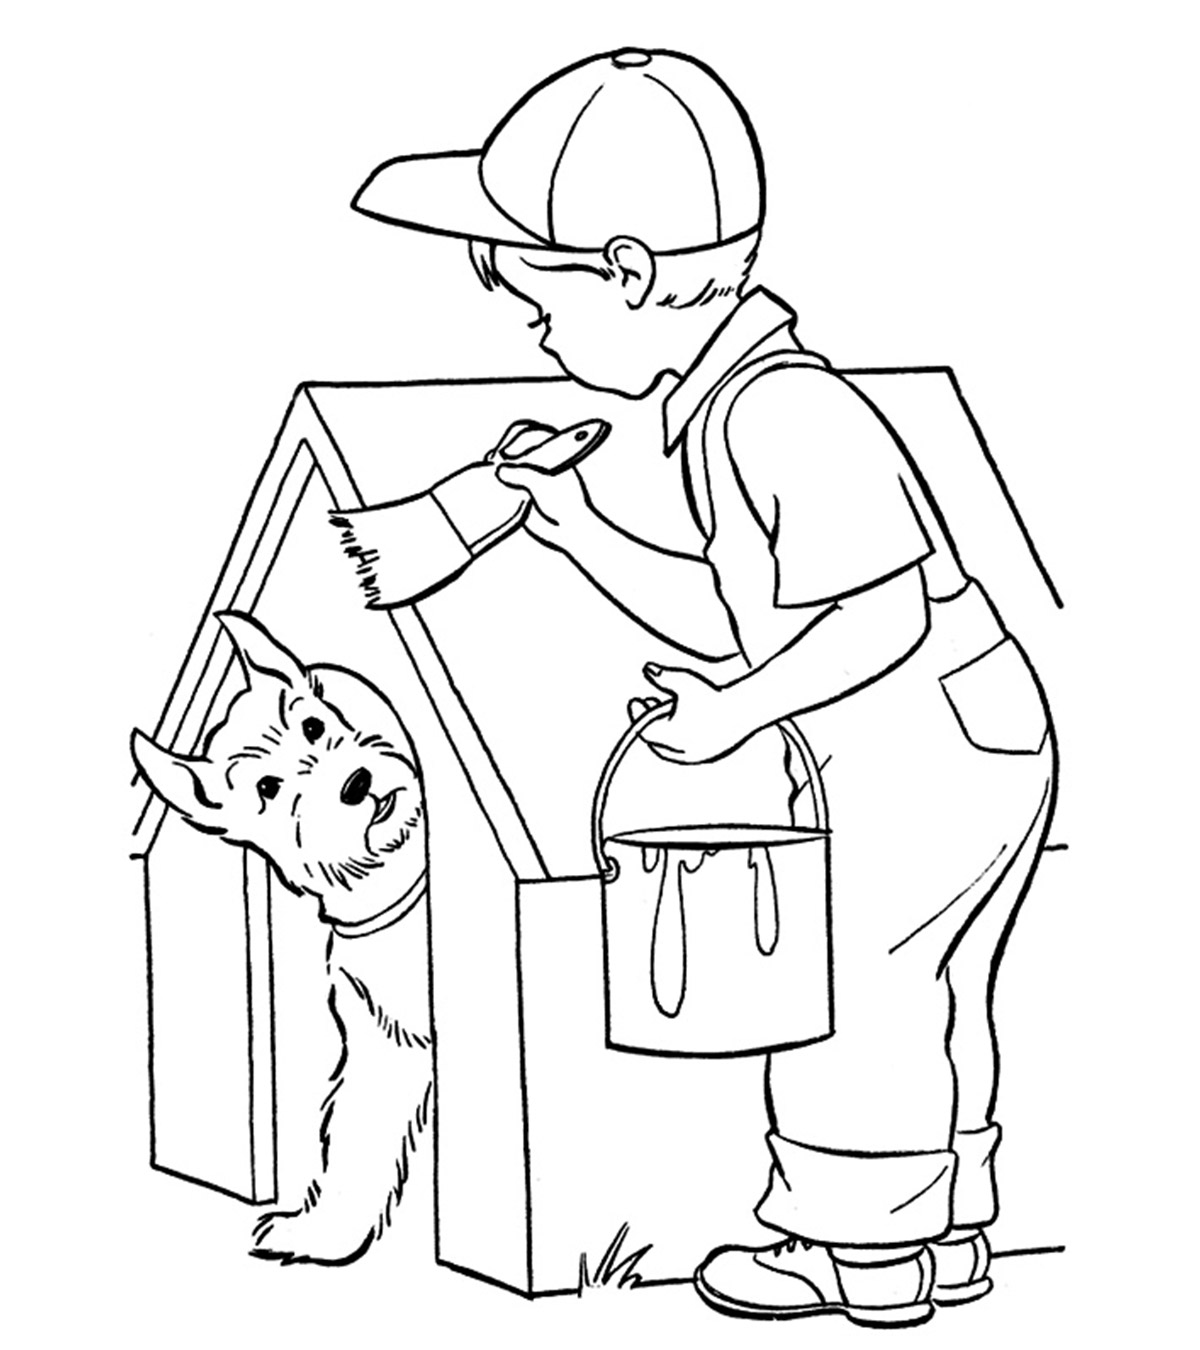 20 Beautiful House Coloring Pages To Keep Your Little One Busy